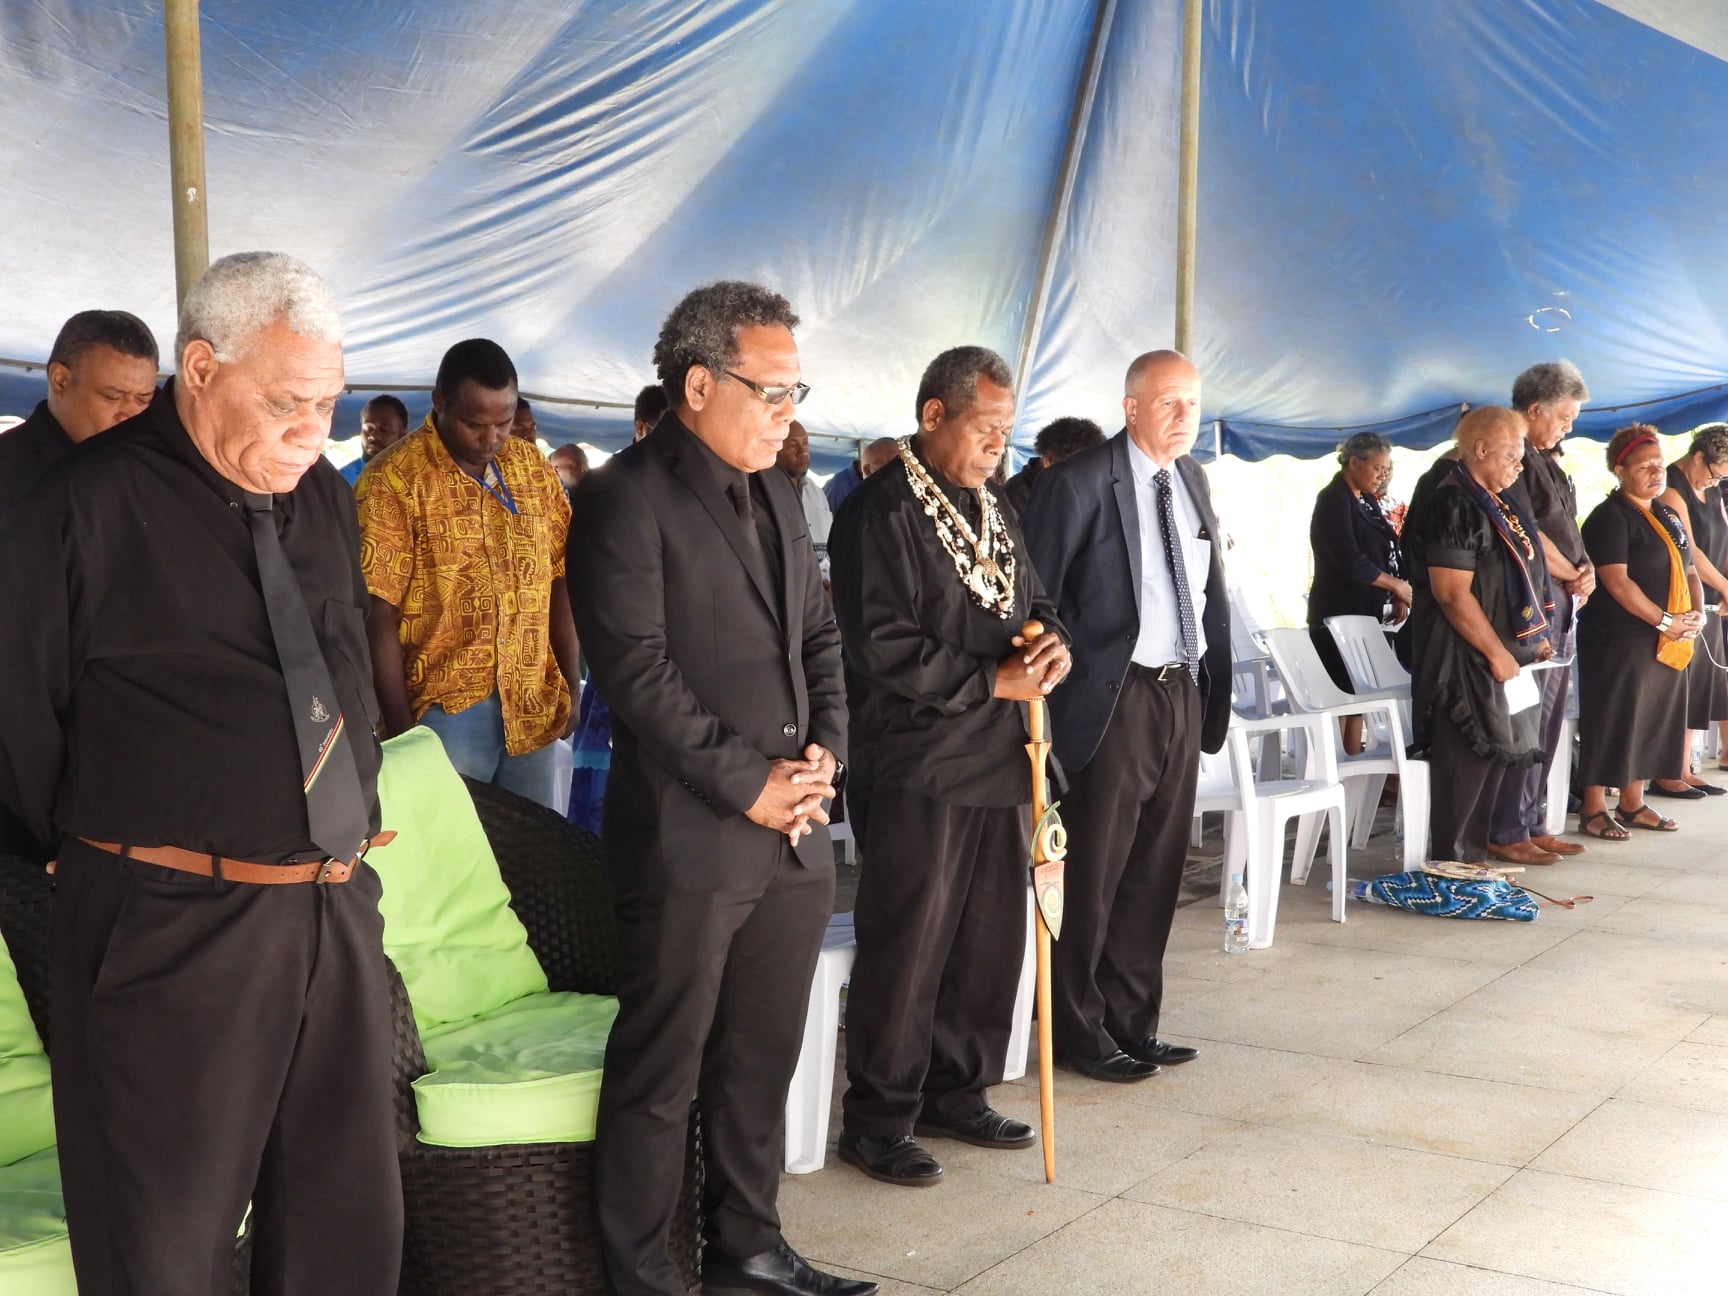 Vanuatu residents observing a minute of silence in respect of late Grand Chief Sir Michael Somare